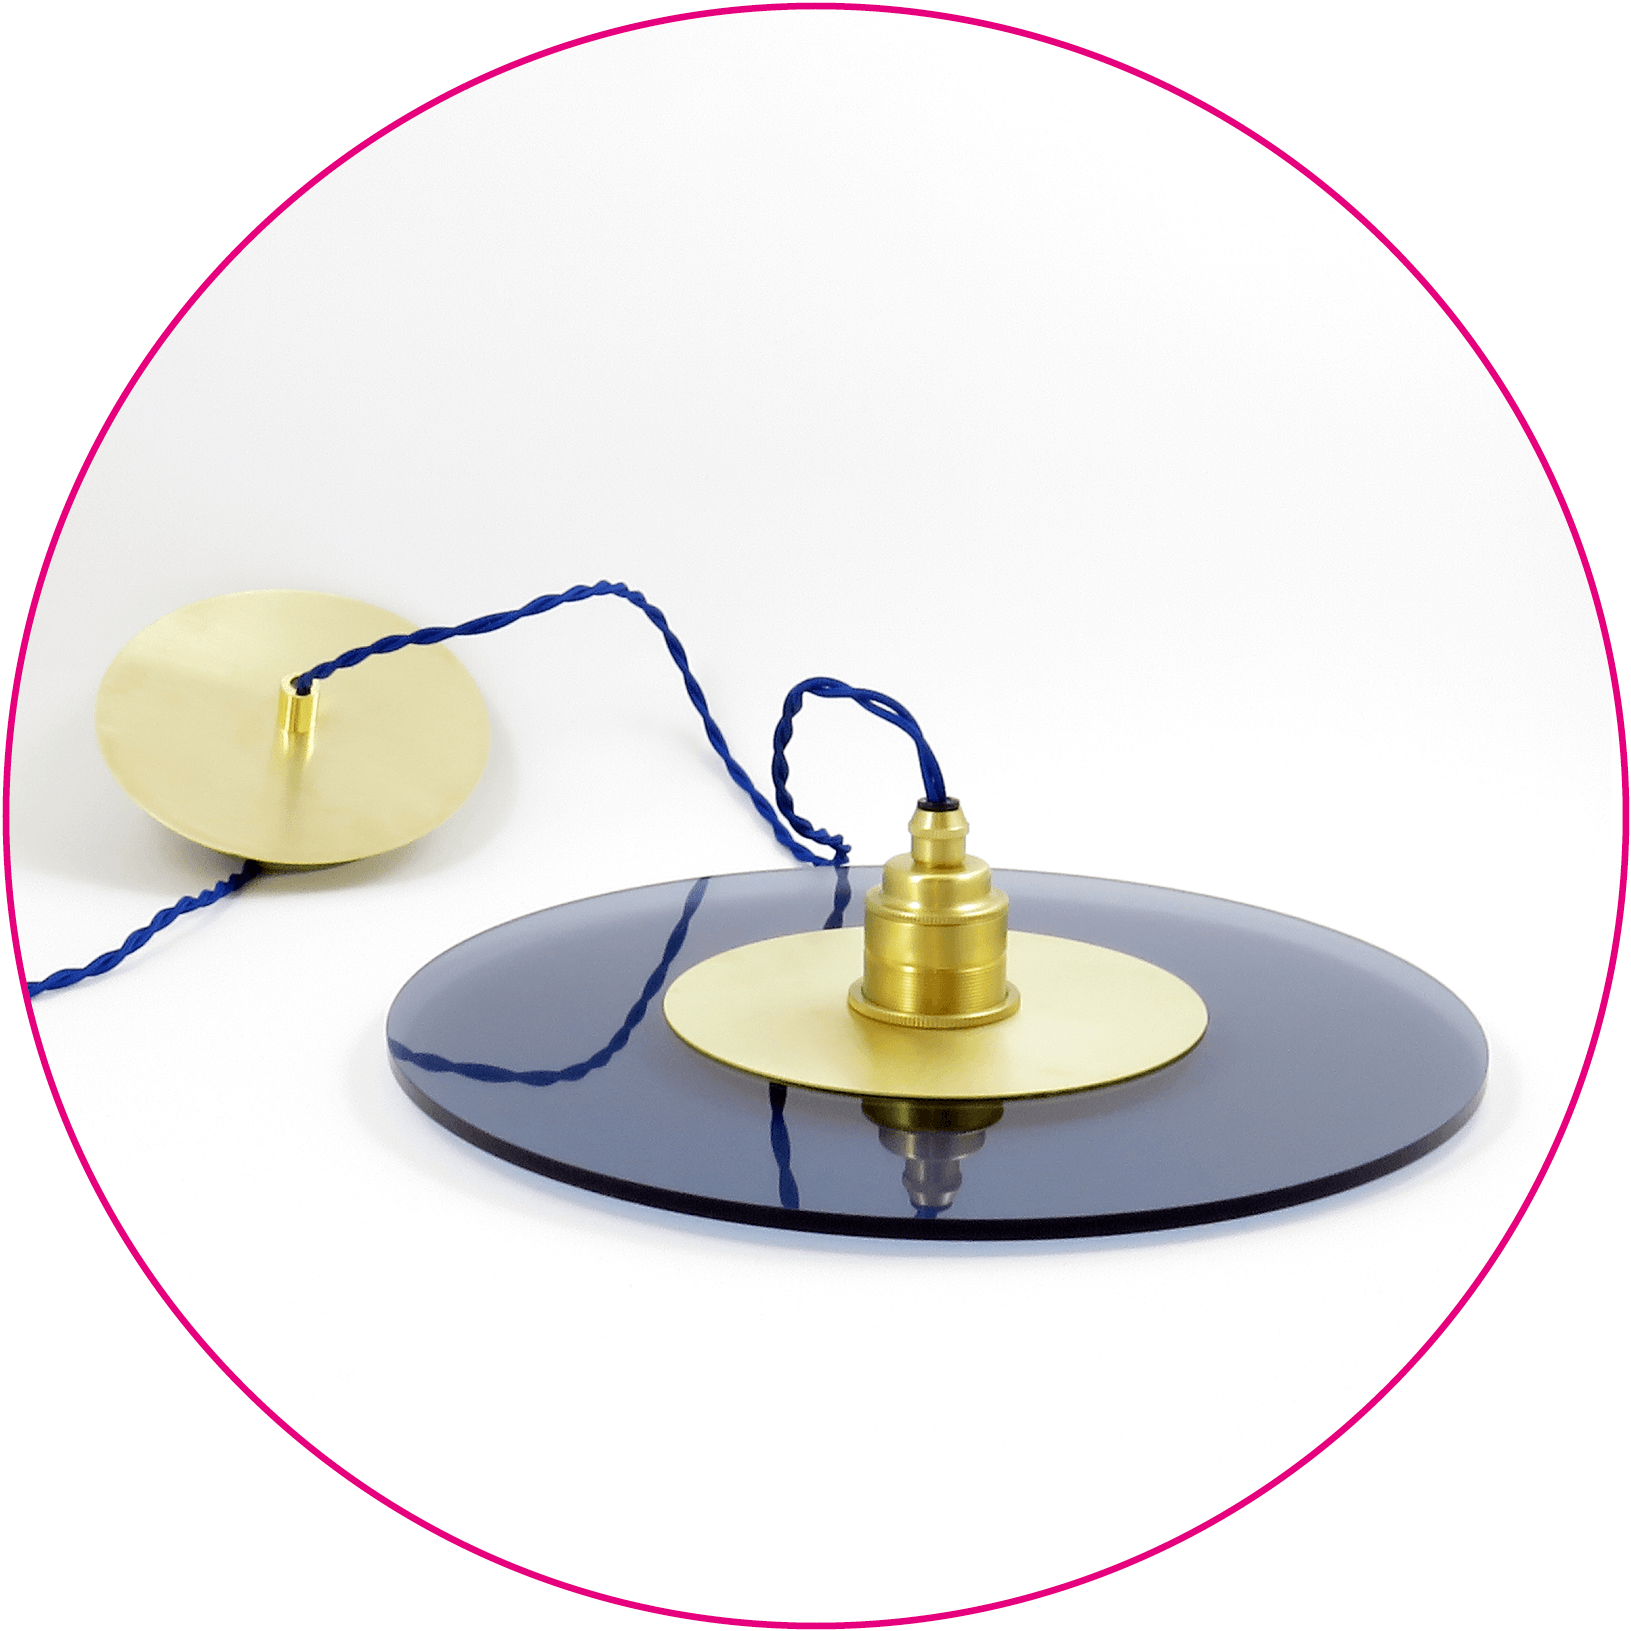 BLUE CIRCULAR PENDANT LAMP WITH GOLDEN ACESSORIES